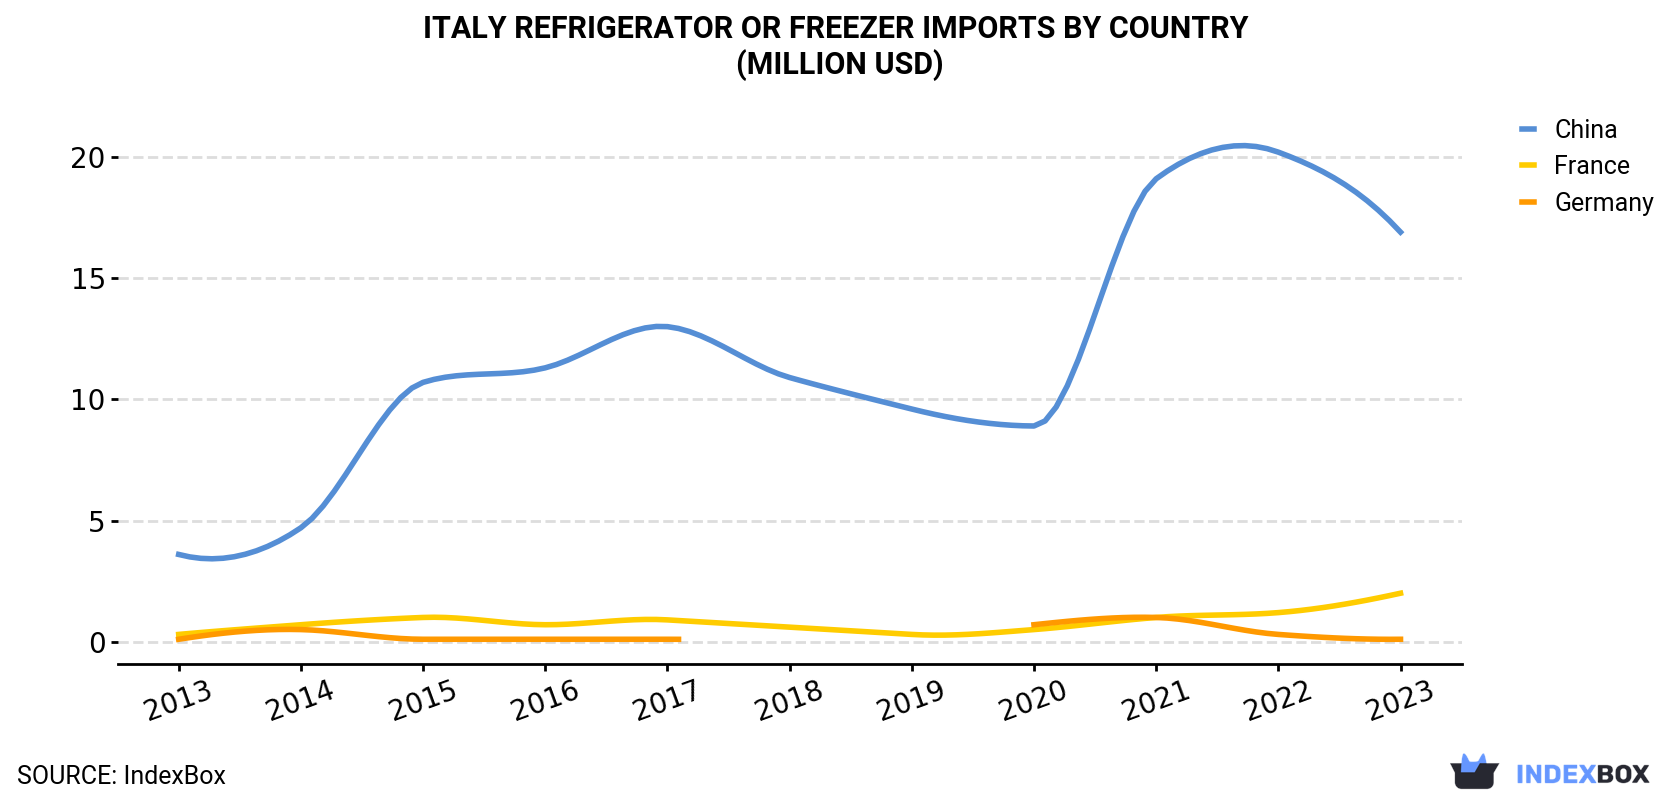 Italy Refrigerator Or Freezer Imports By Country (Million USD)